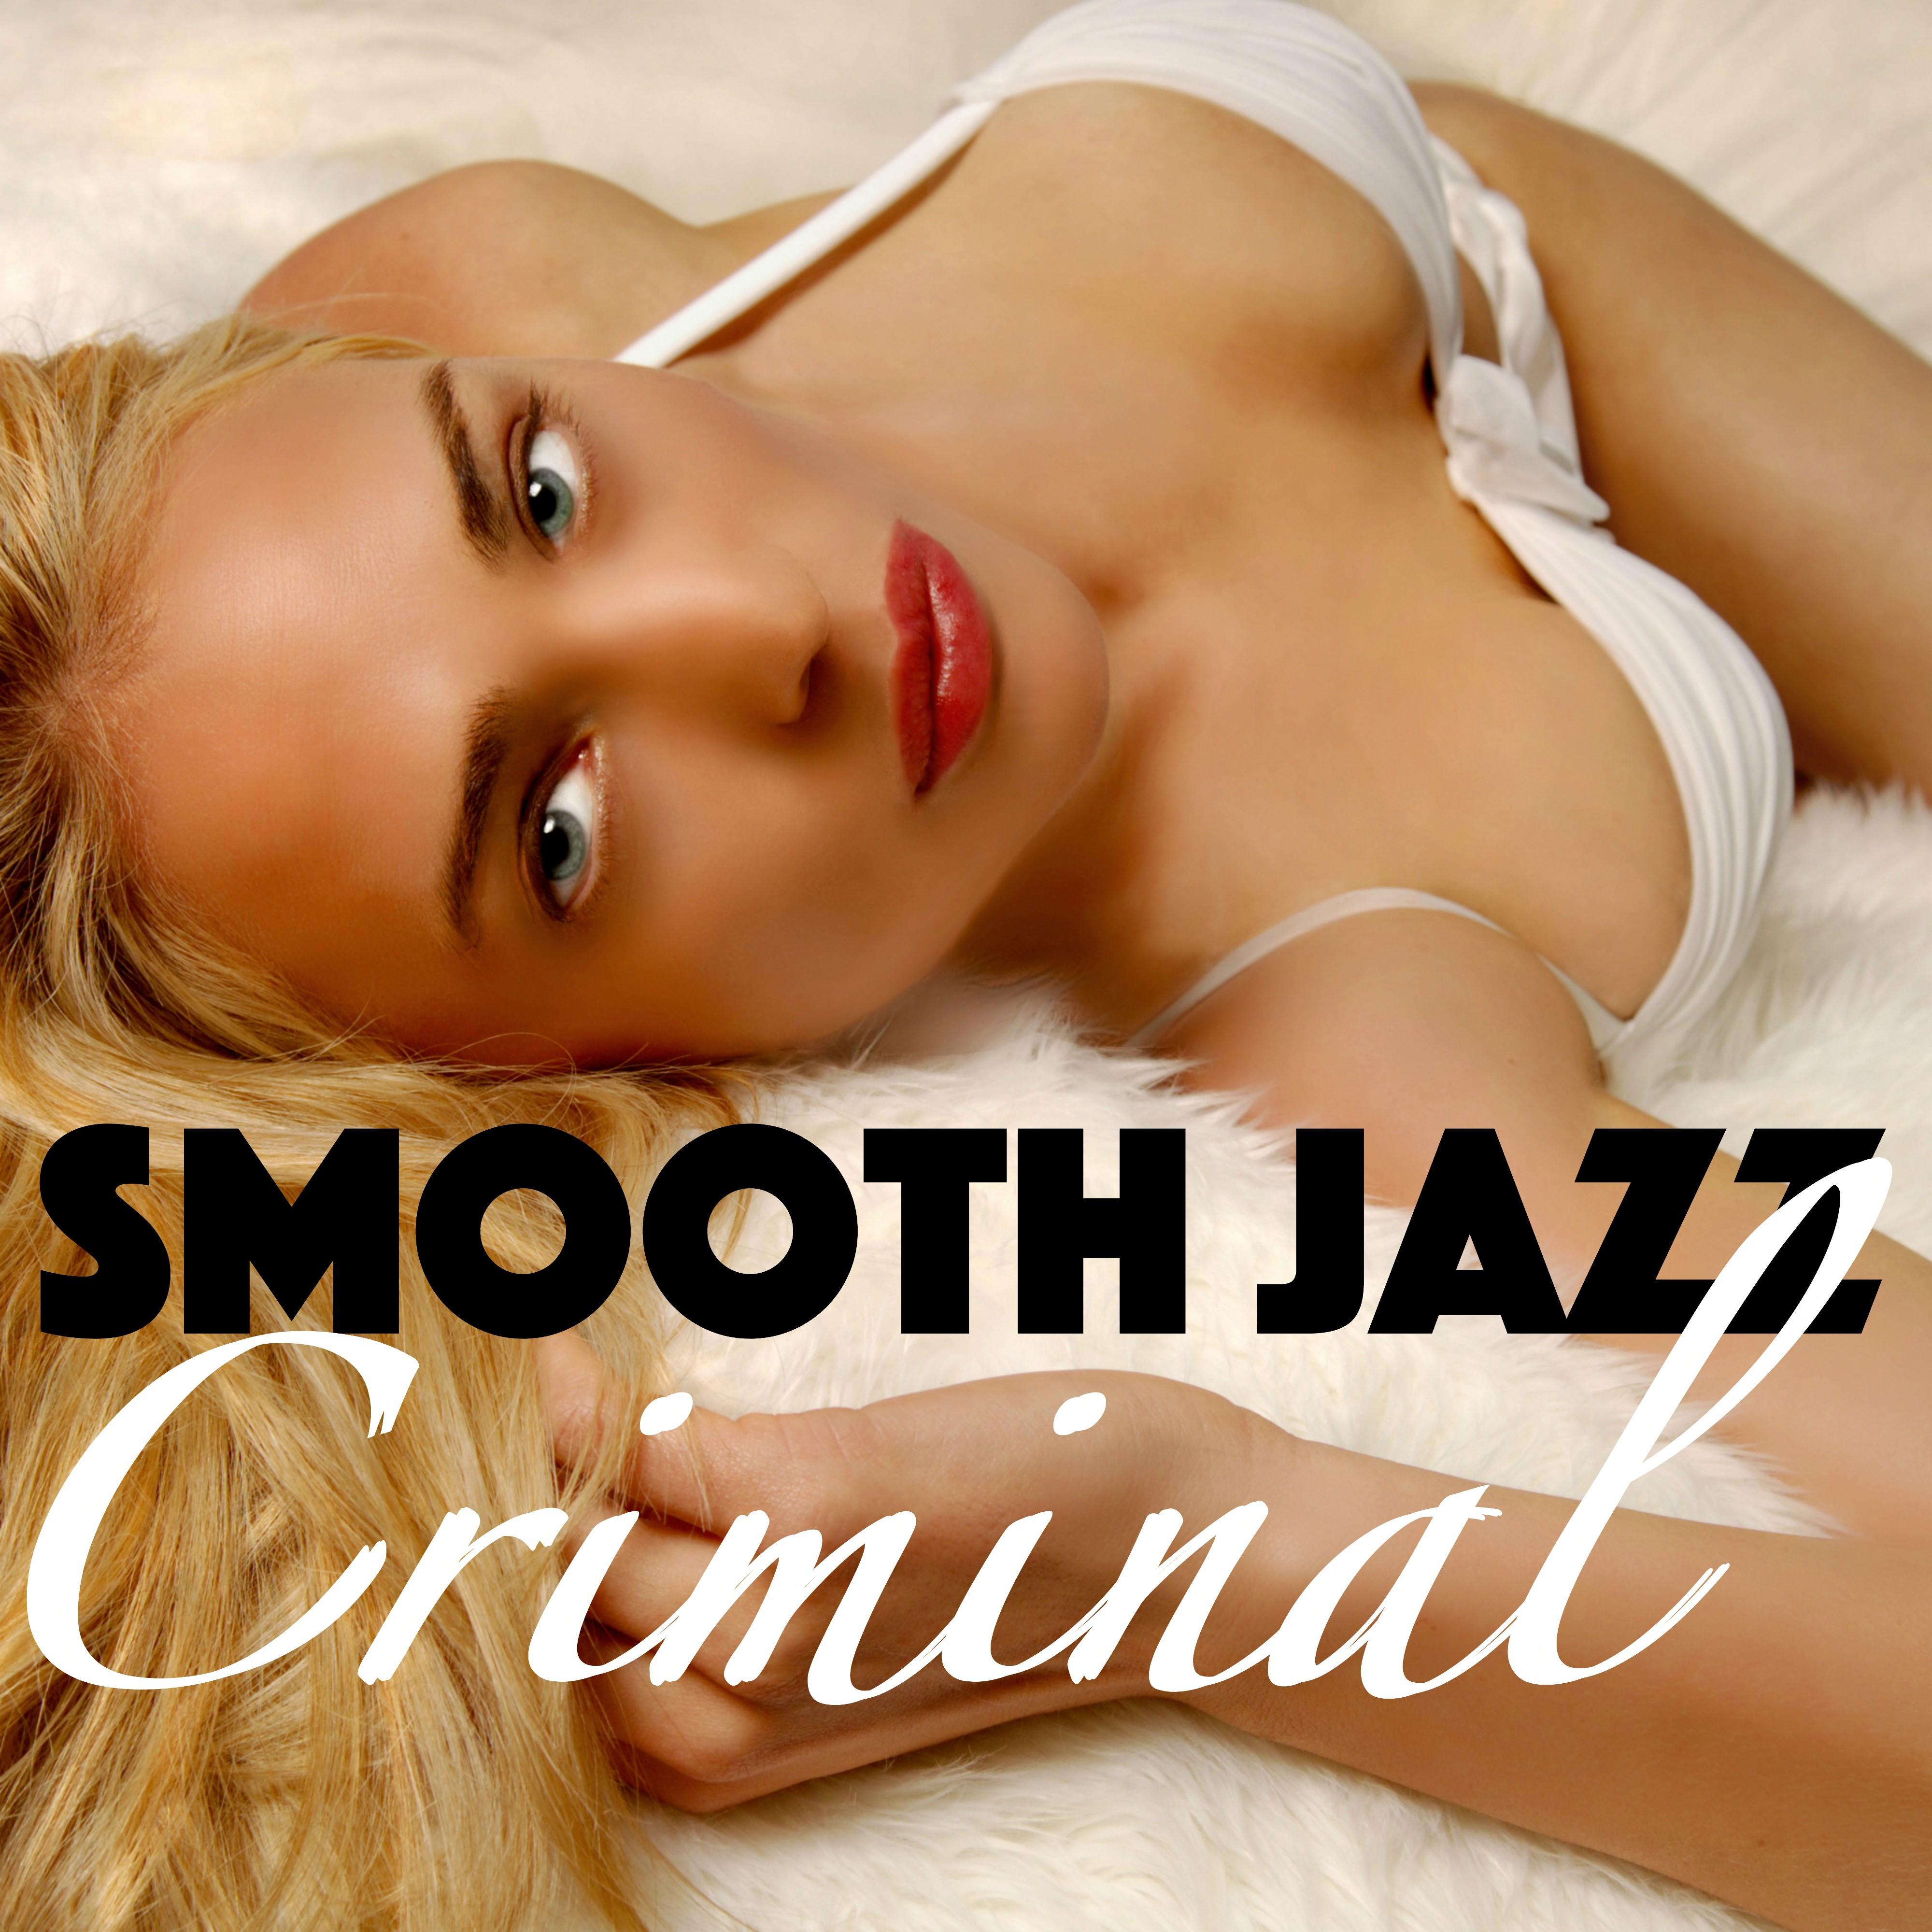 Smooth Jazz Criminal - Solo Piano Bar Lounge & Jazz for Relaxation and Cocktails